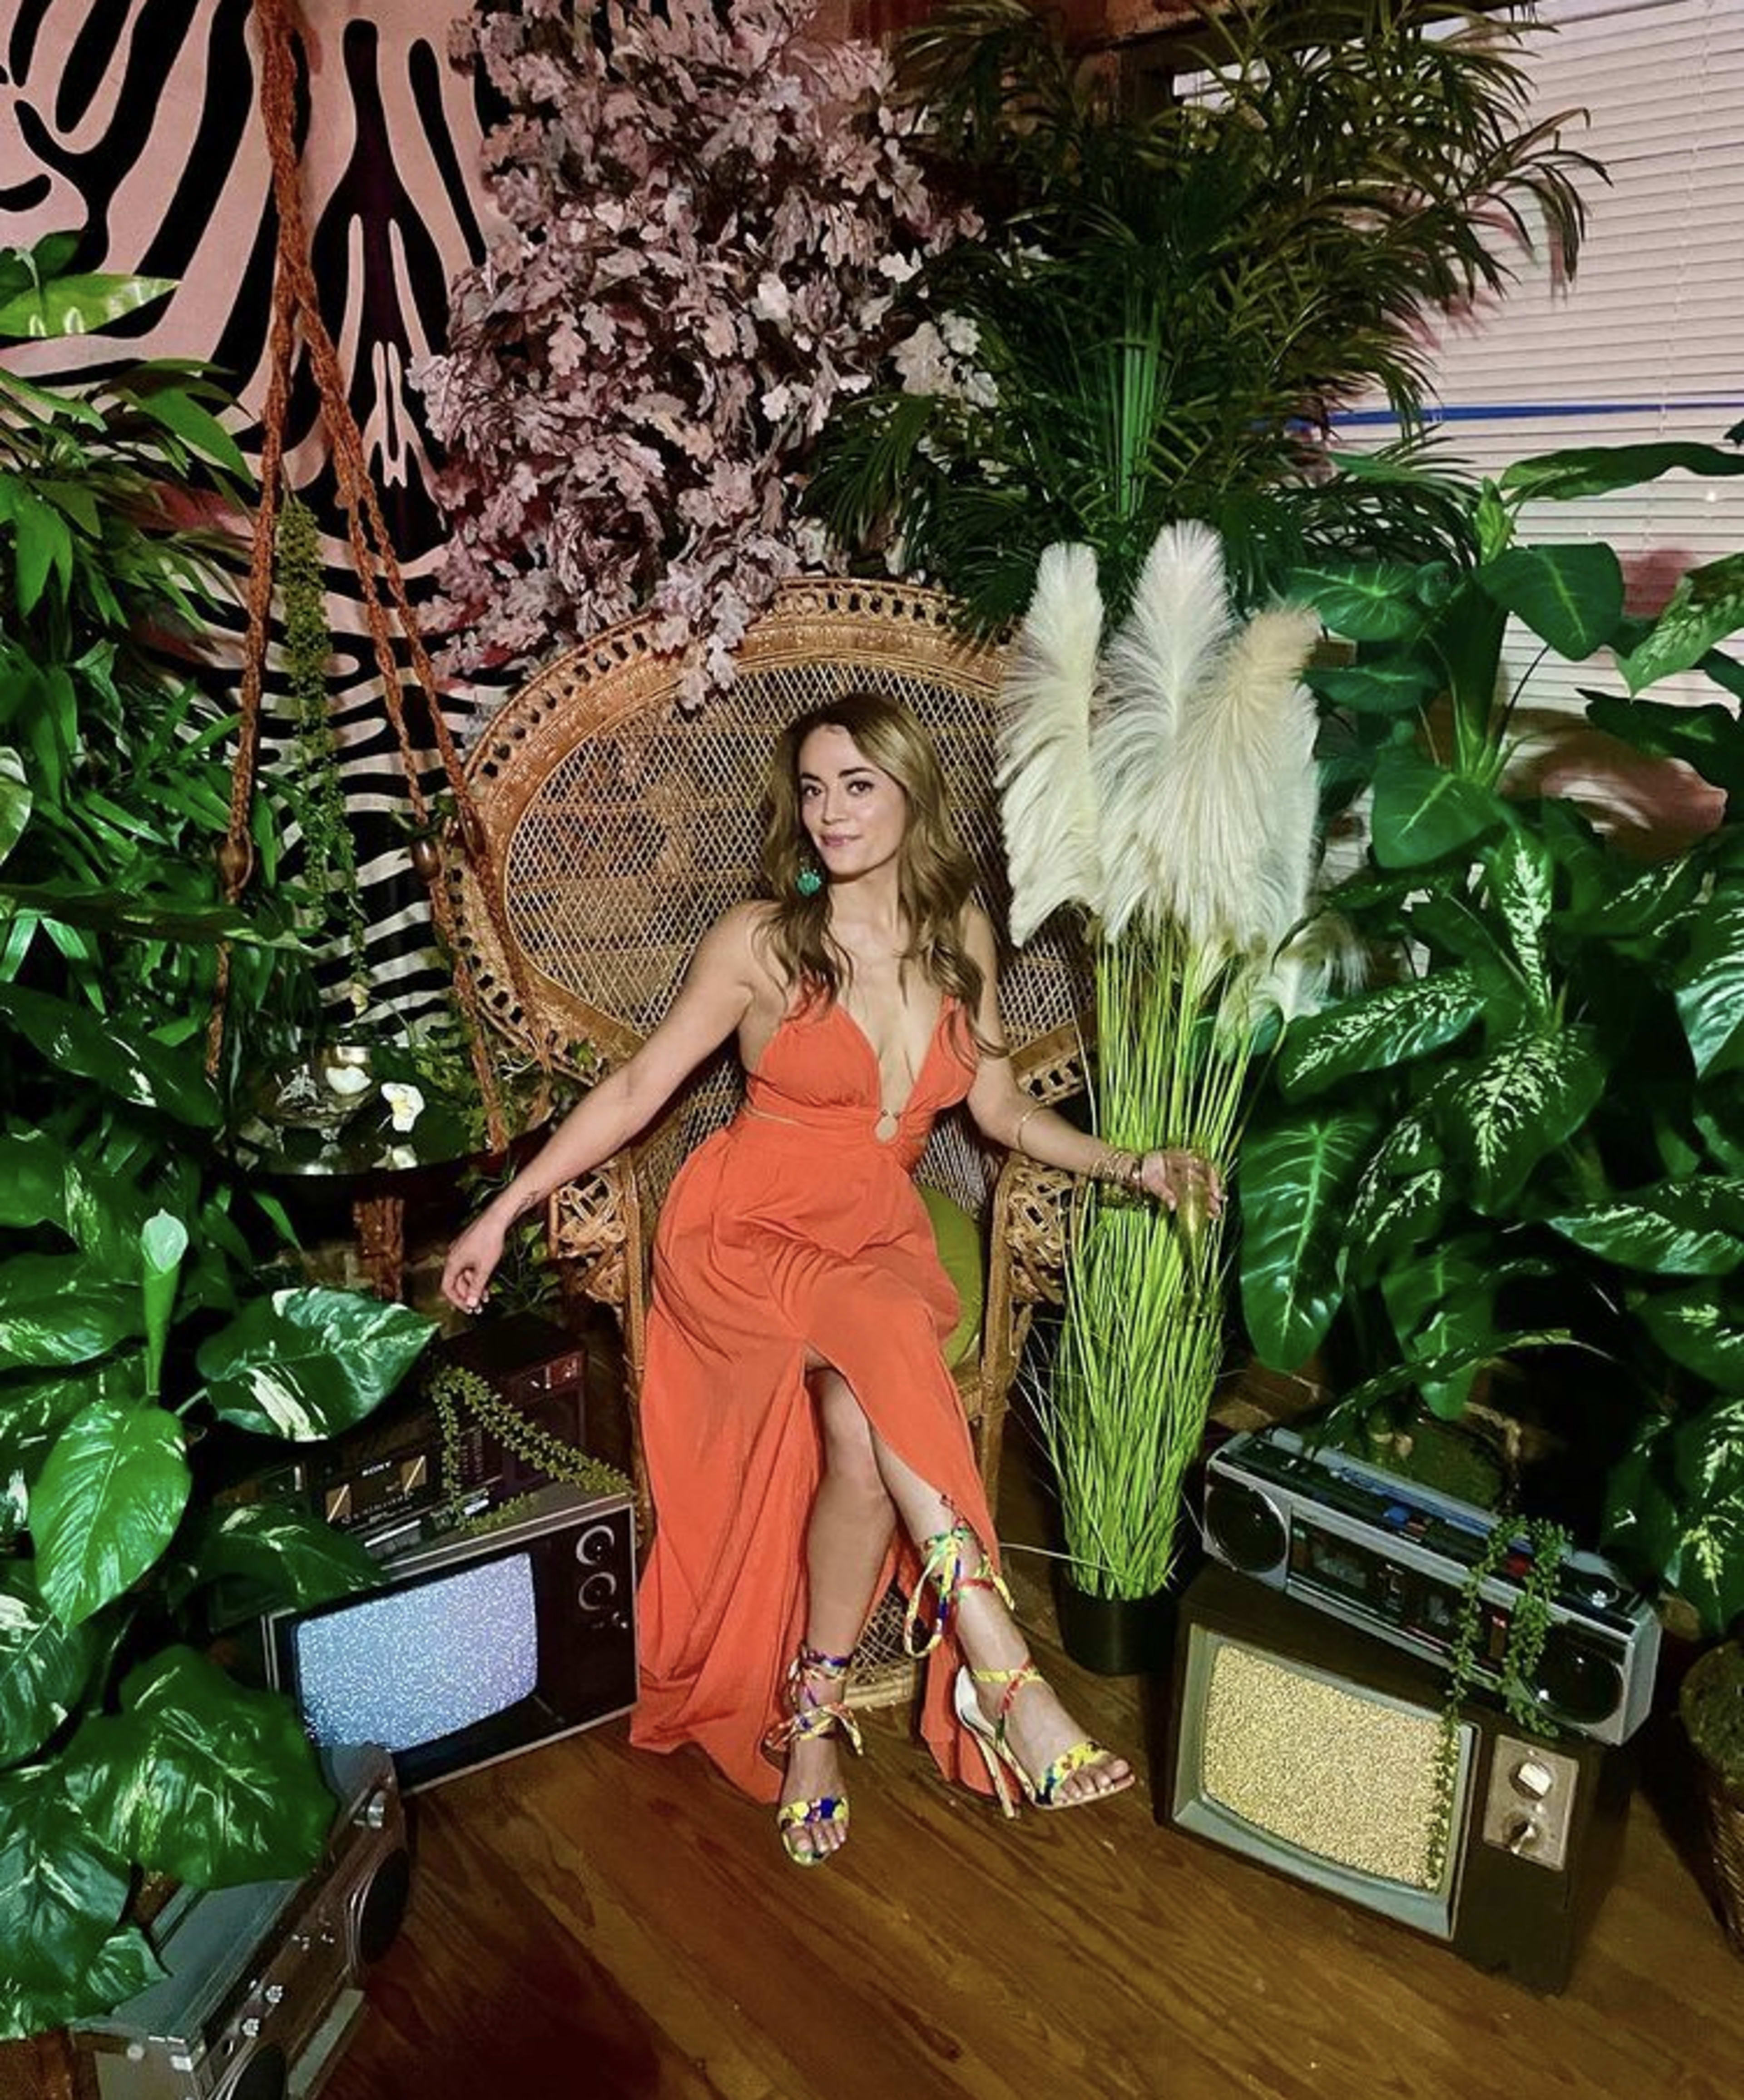 A woman in a red dress sitting in a chair surrounded by plants.